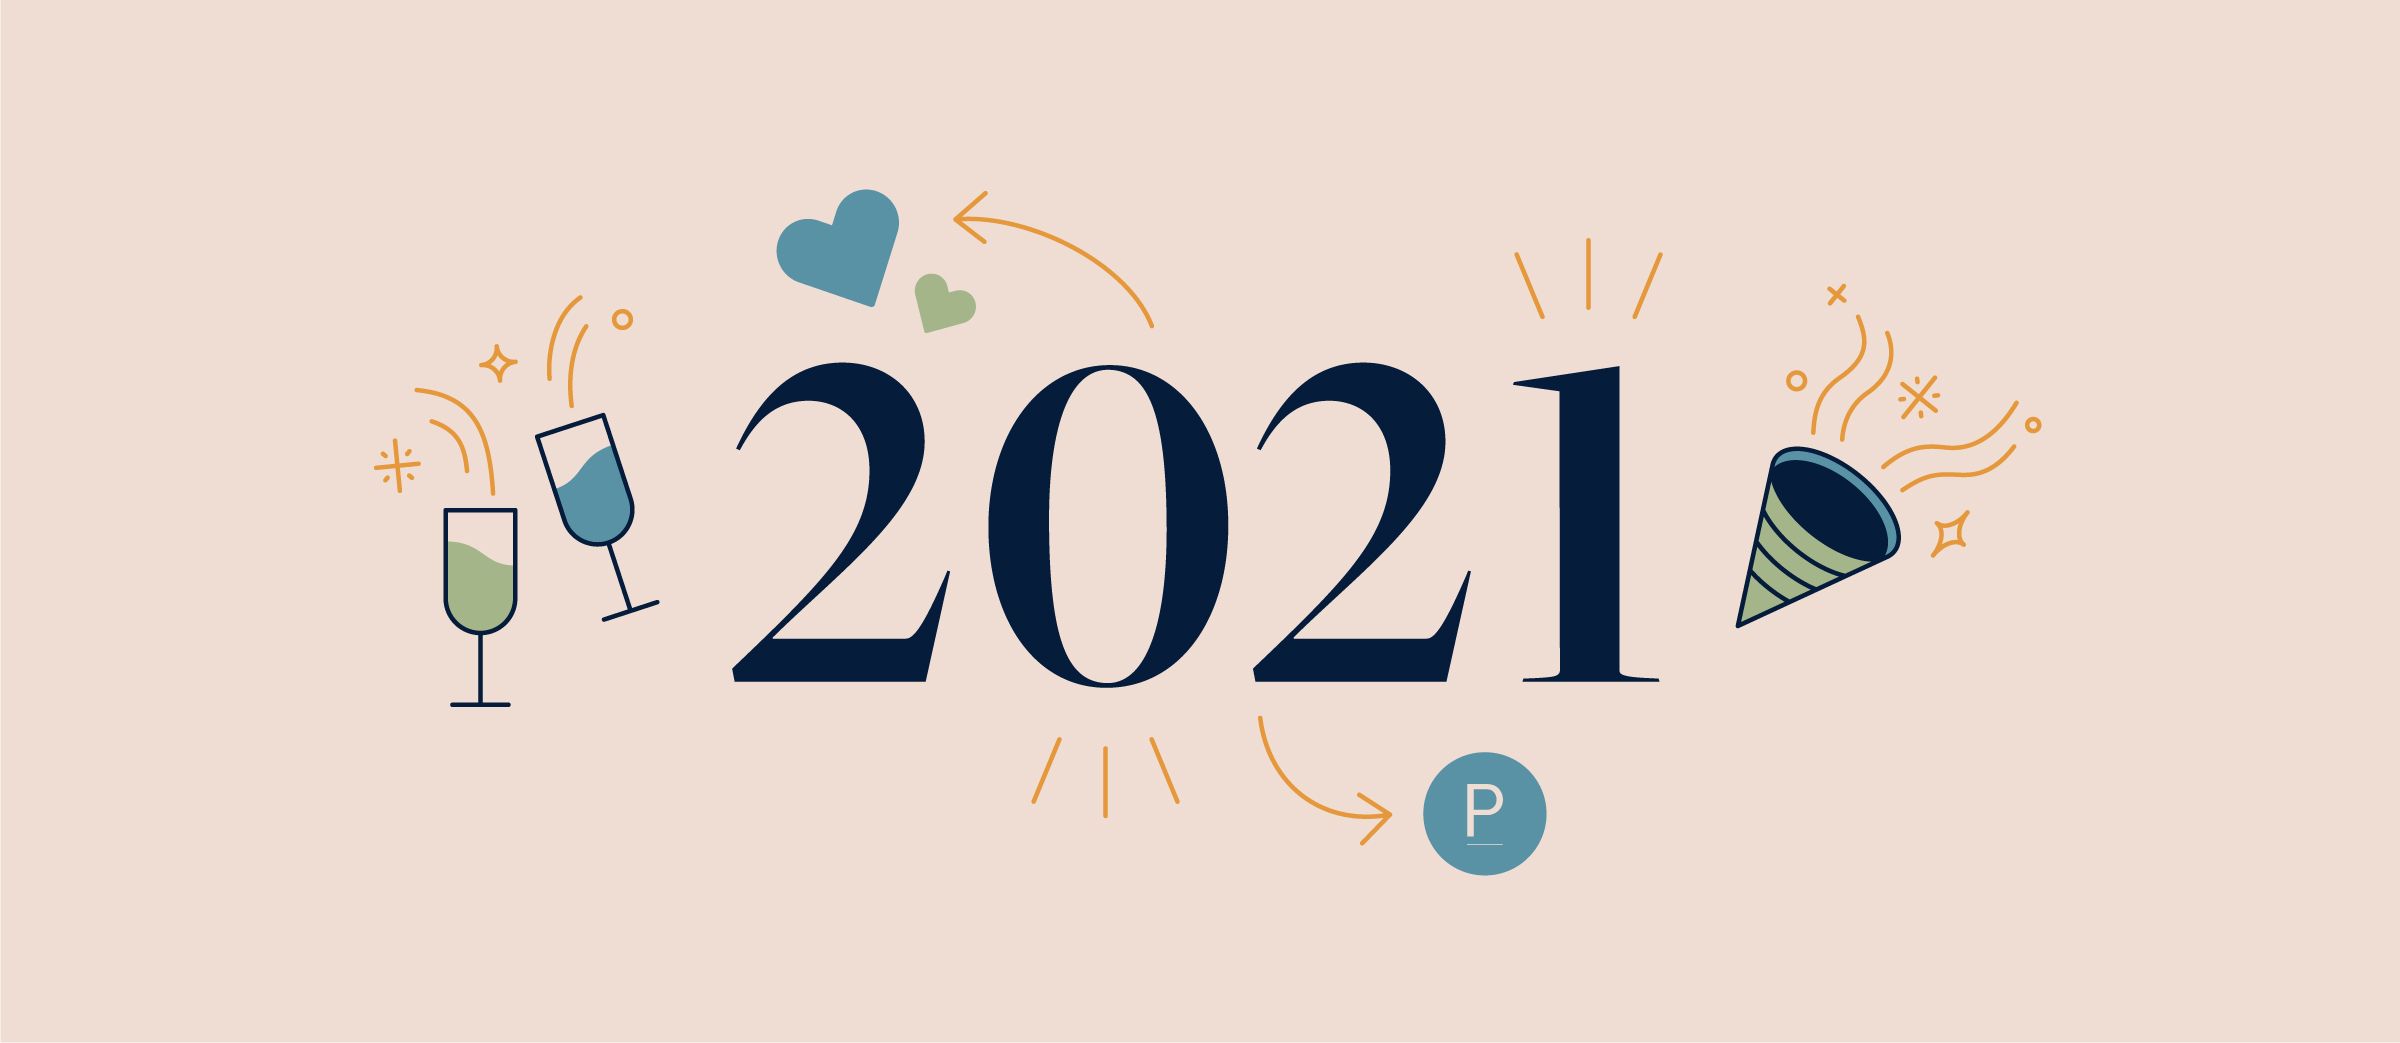 PLANOLY 2021 Year in Review, by catherine-mitchell